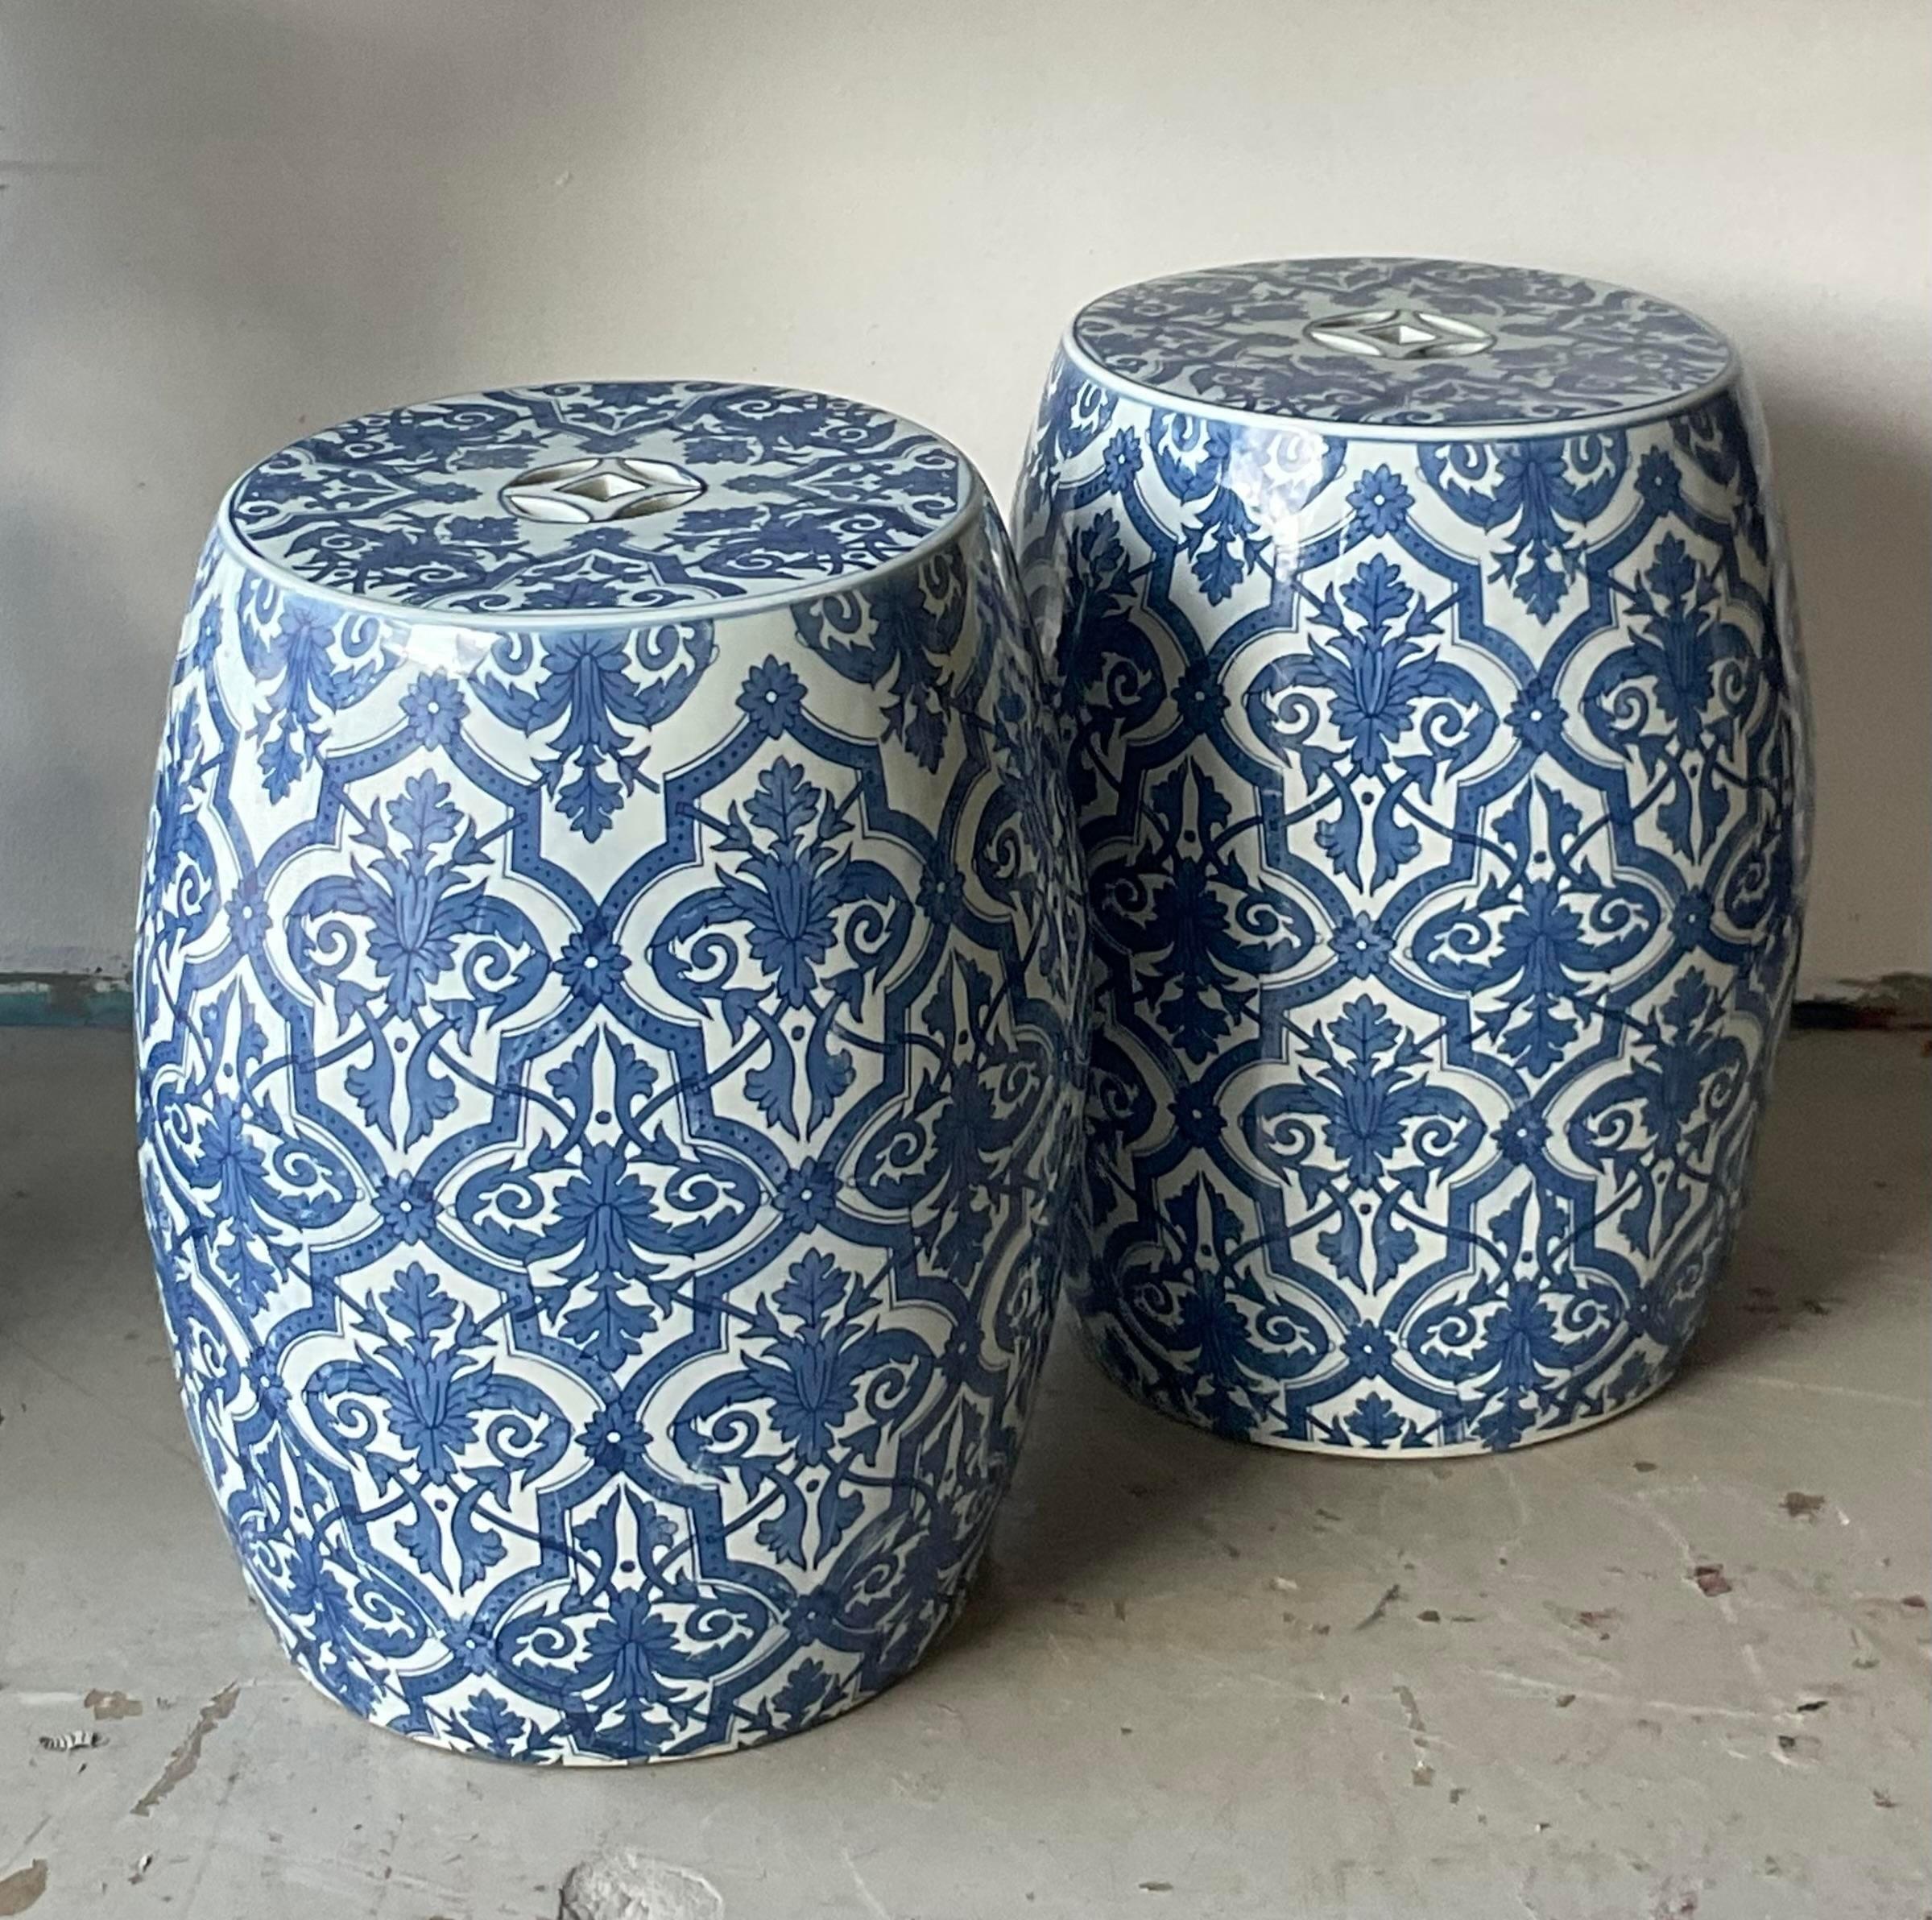 Vintage Coastal Blue and White Garden Stools - a Pair For Sale 2